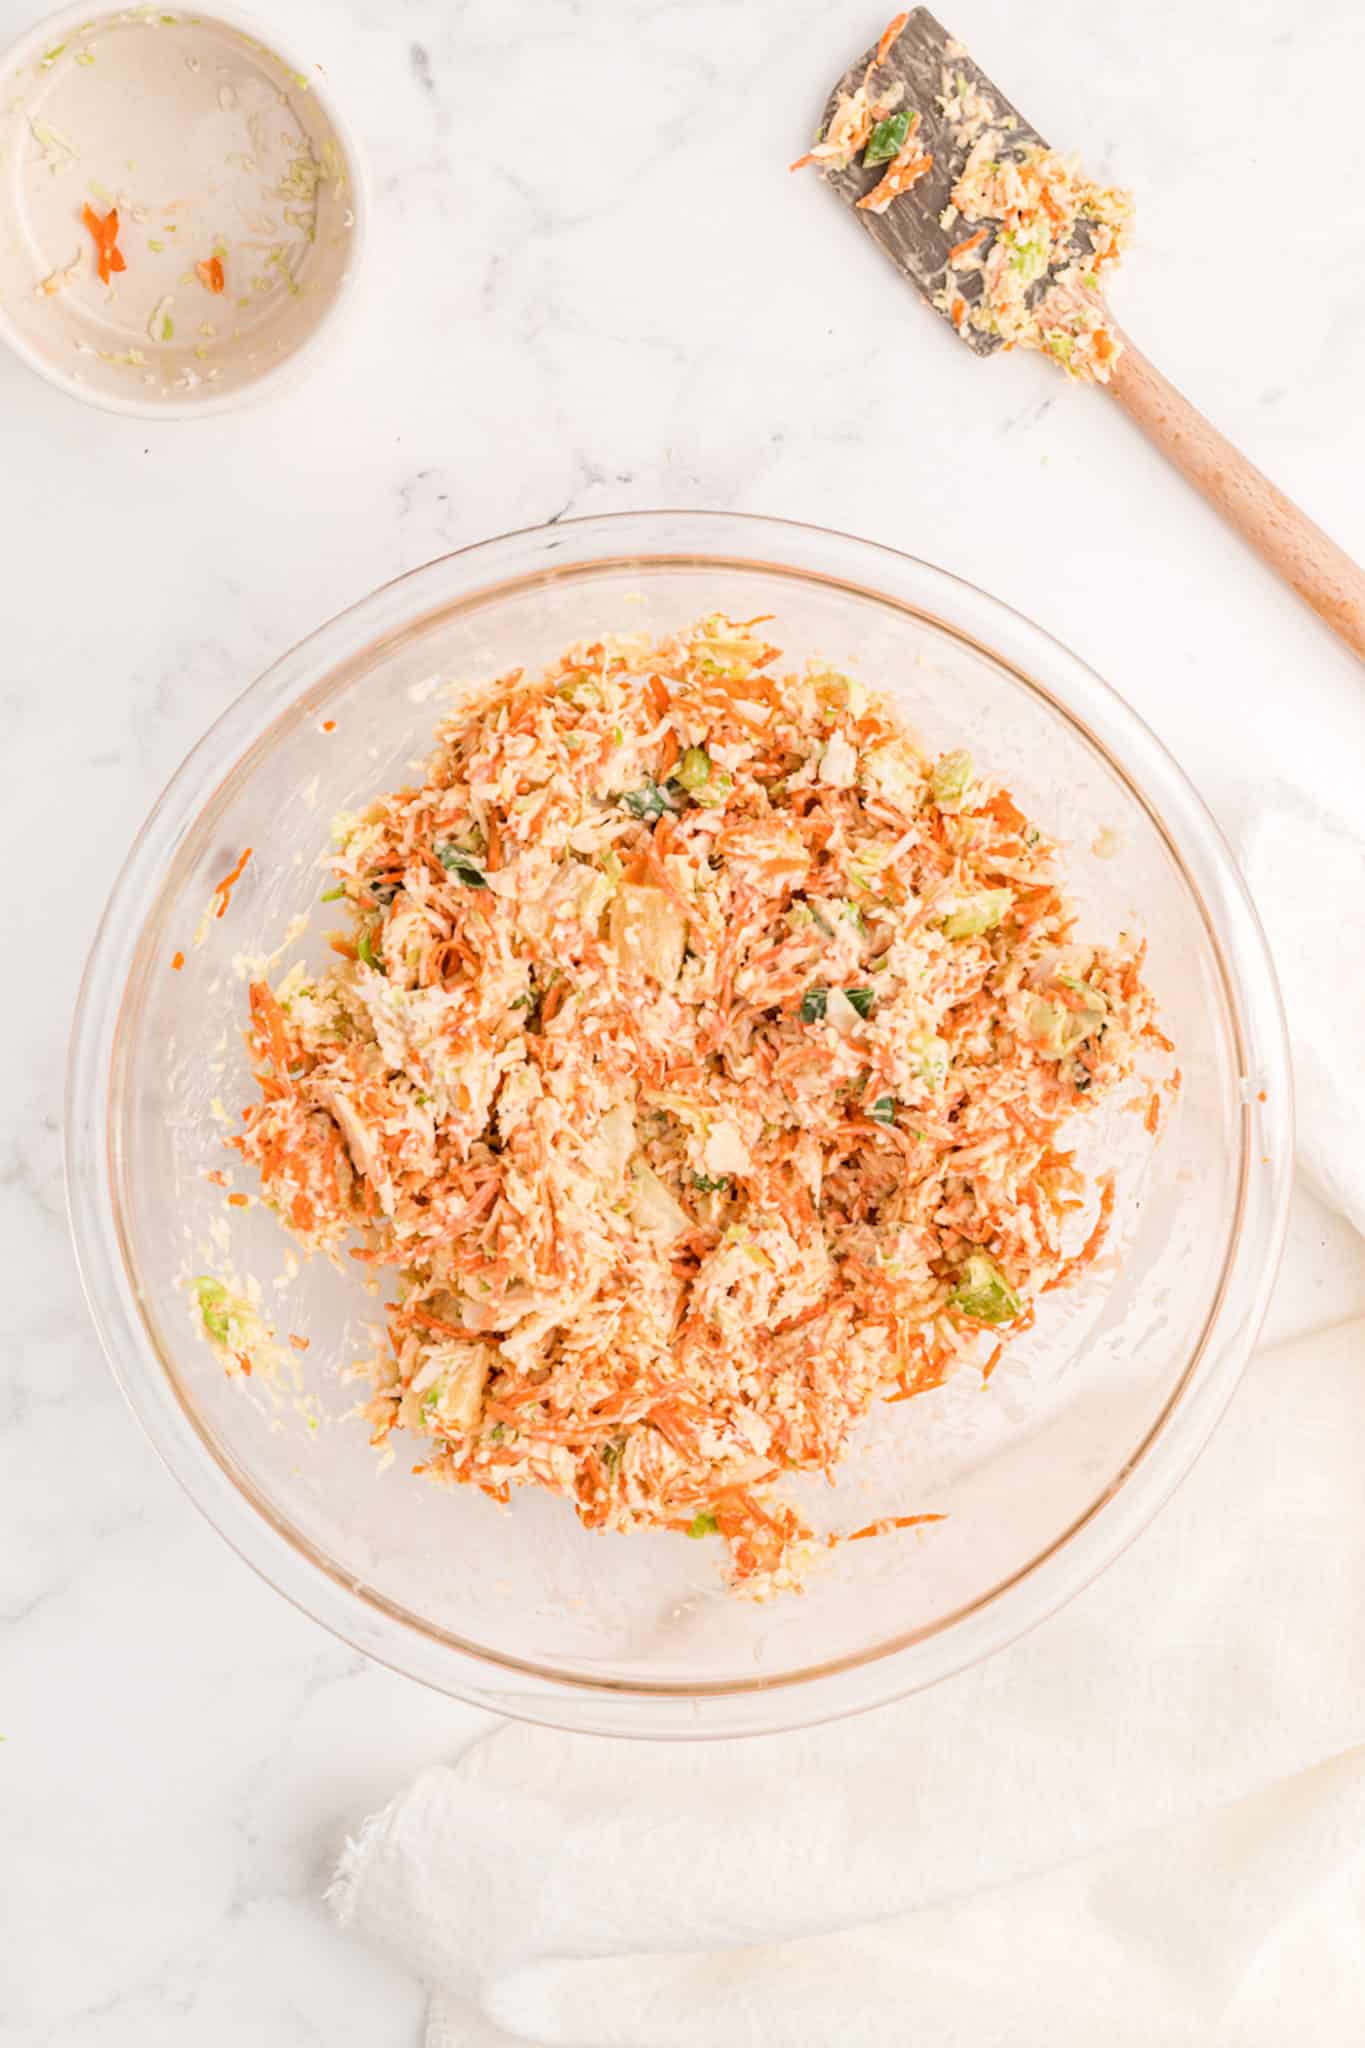 whole30 coleslaw stirred in a bowl with carrots.